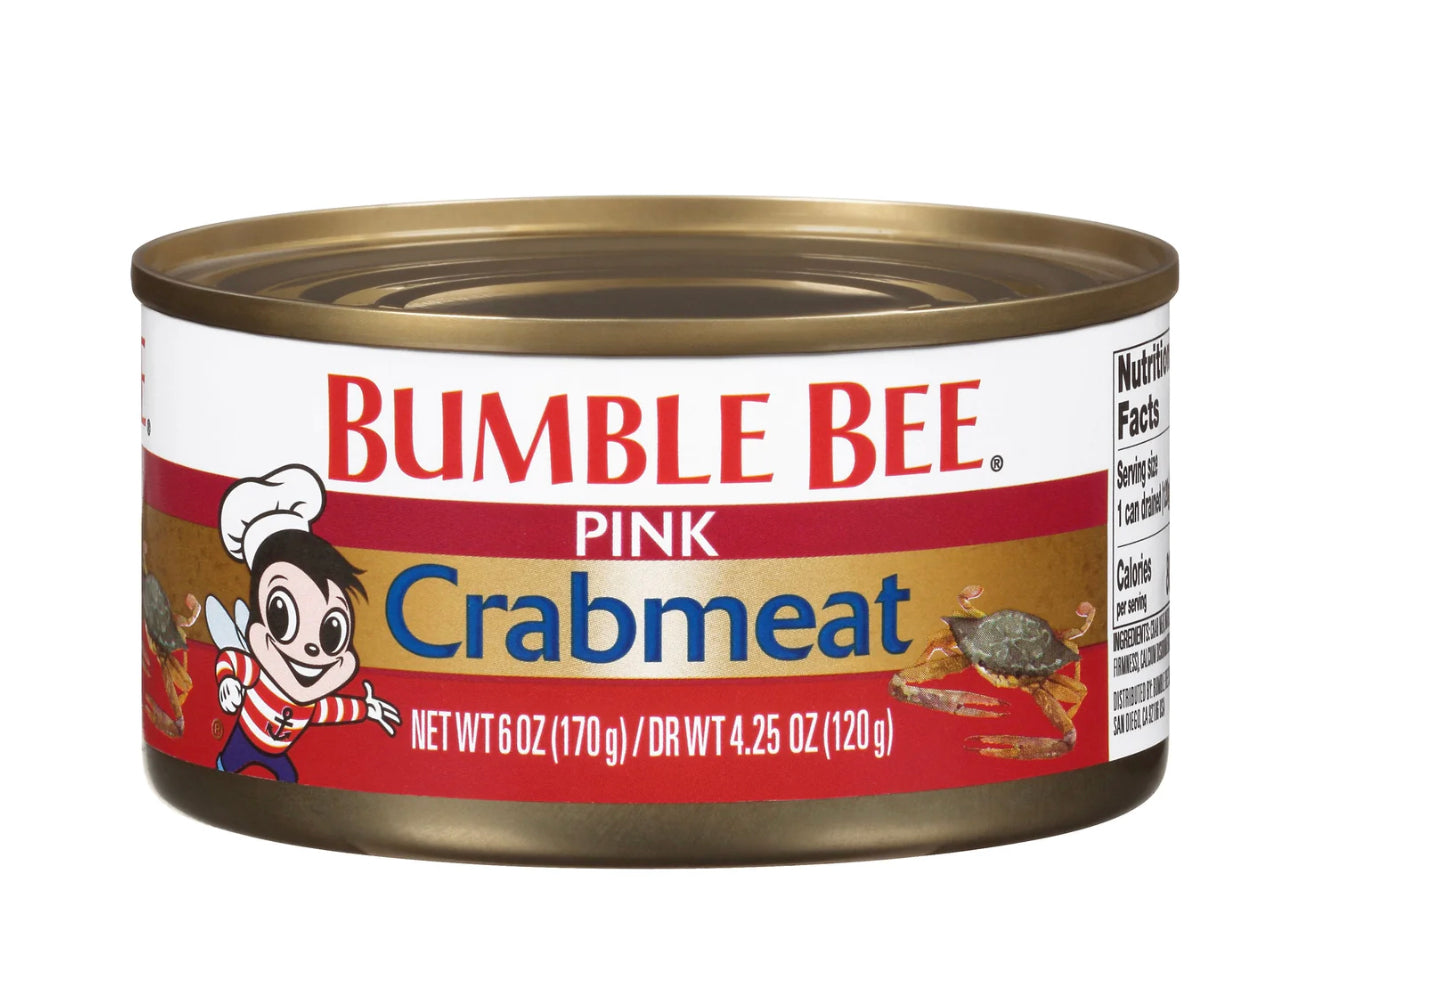 Bumble Bee Pink Crabmeat 6oz